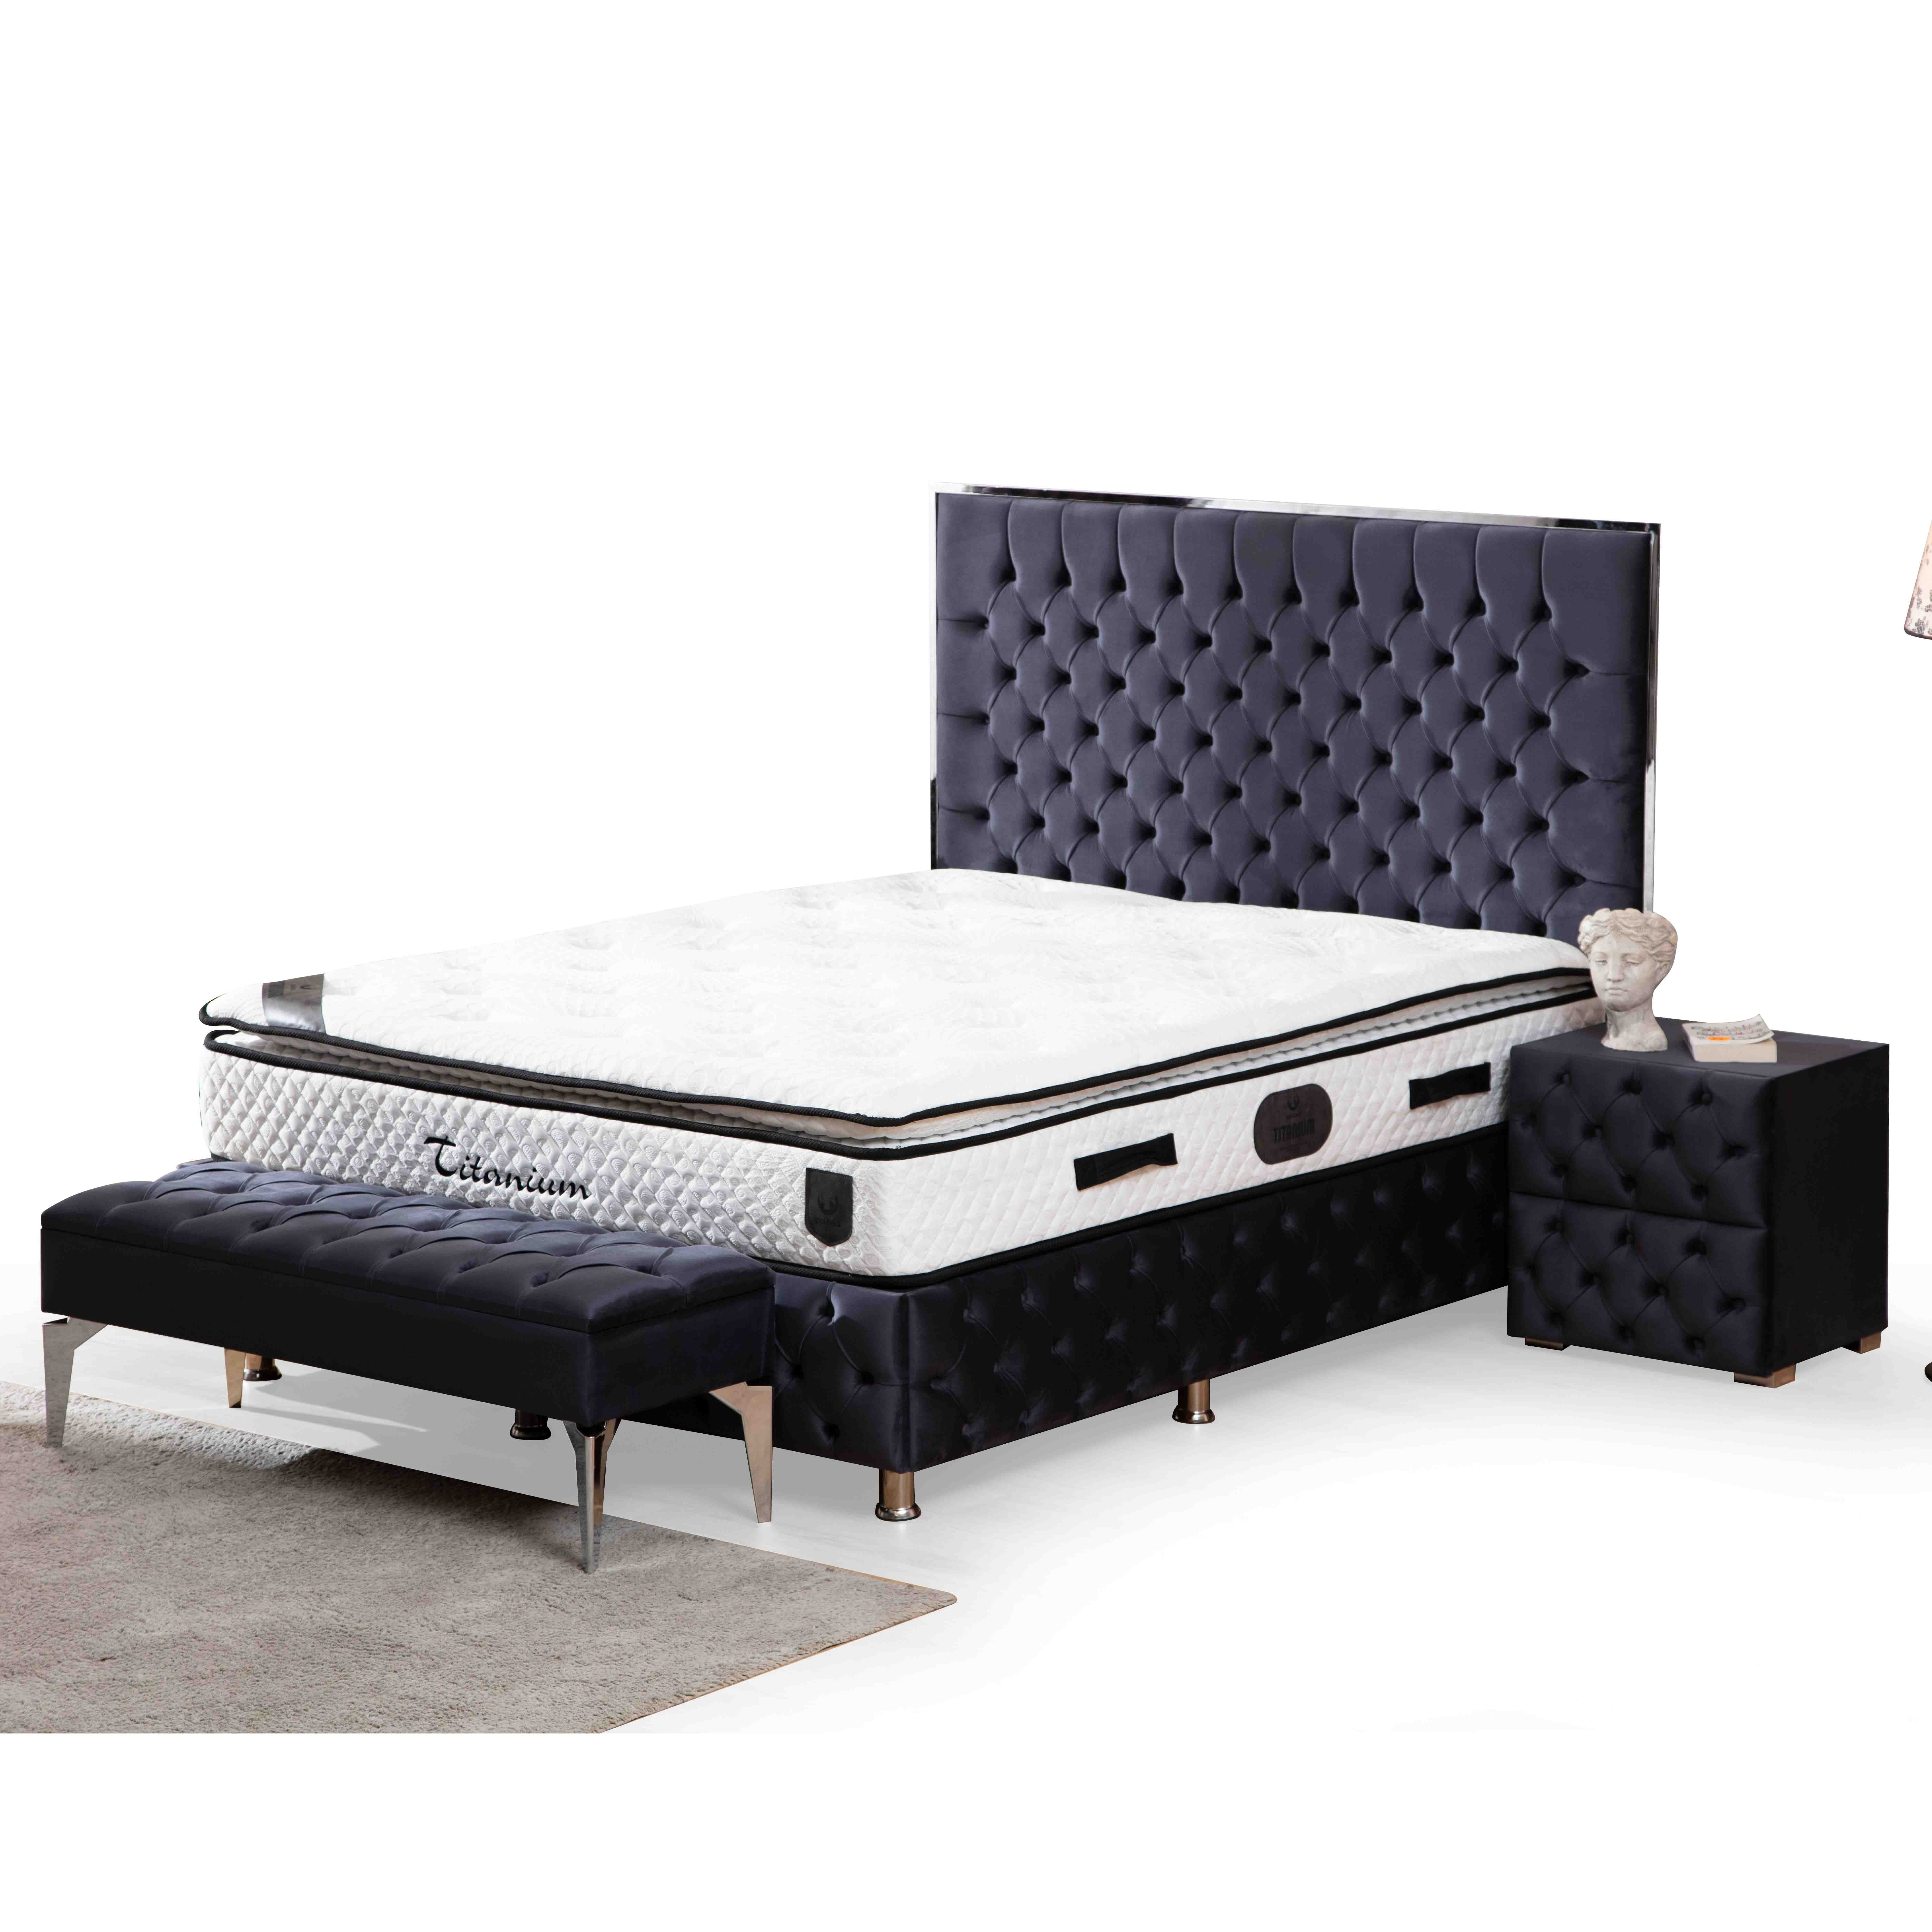 Metalax Bed With Storage 90*190